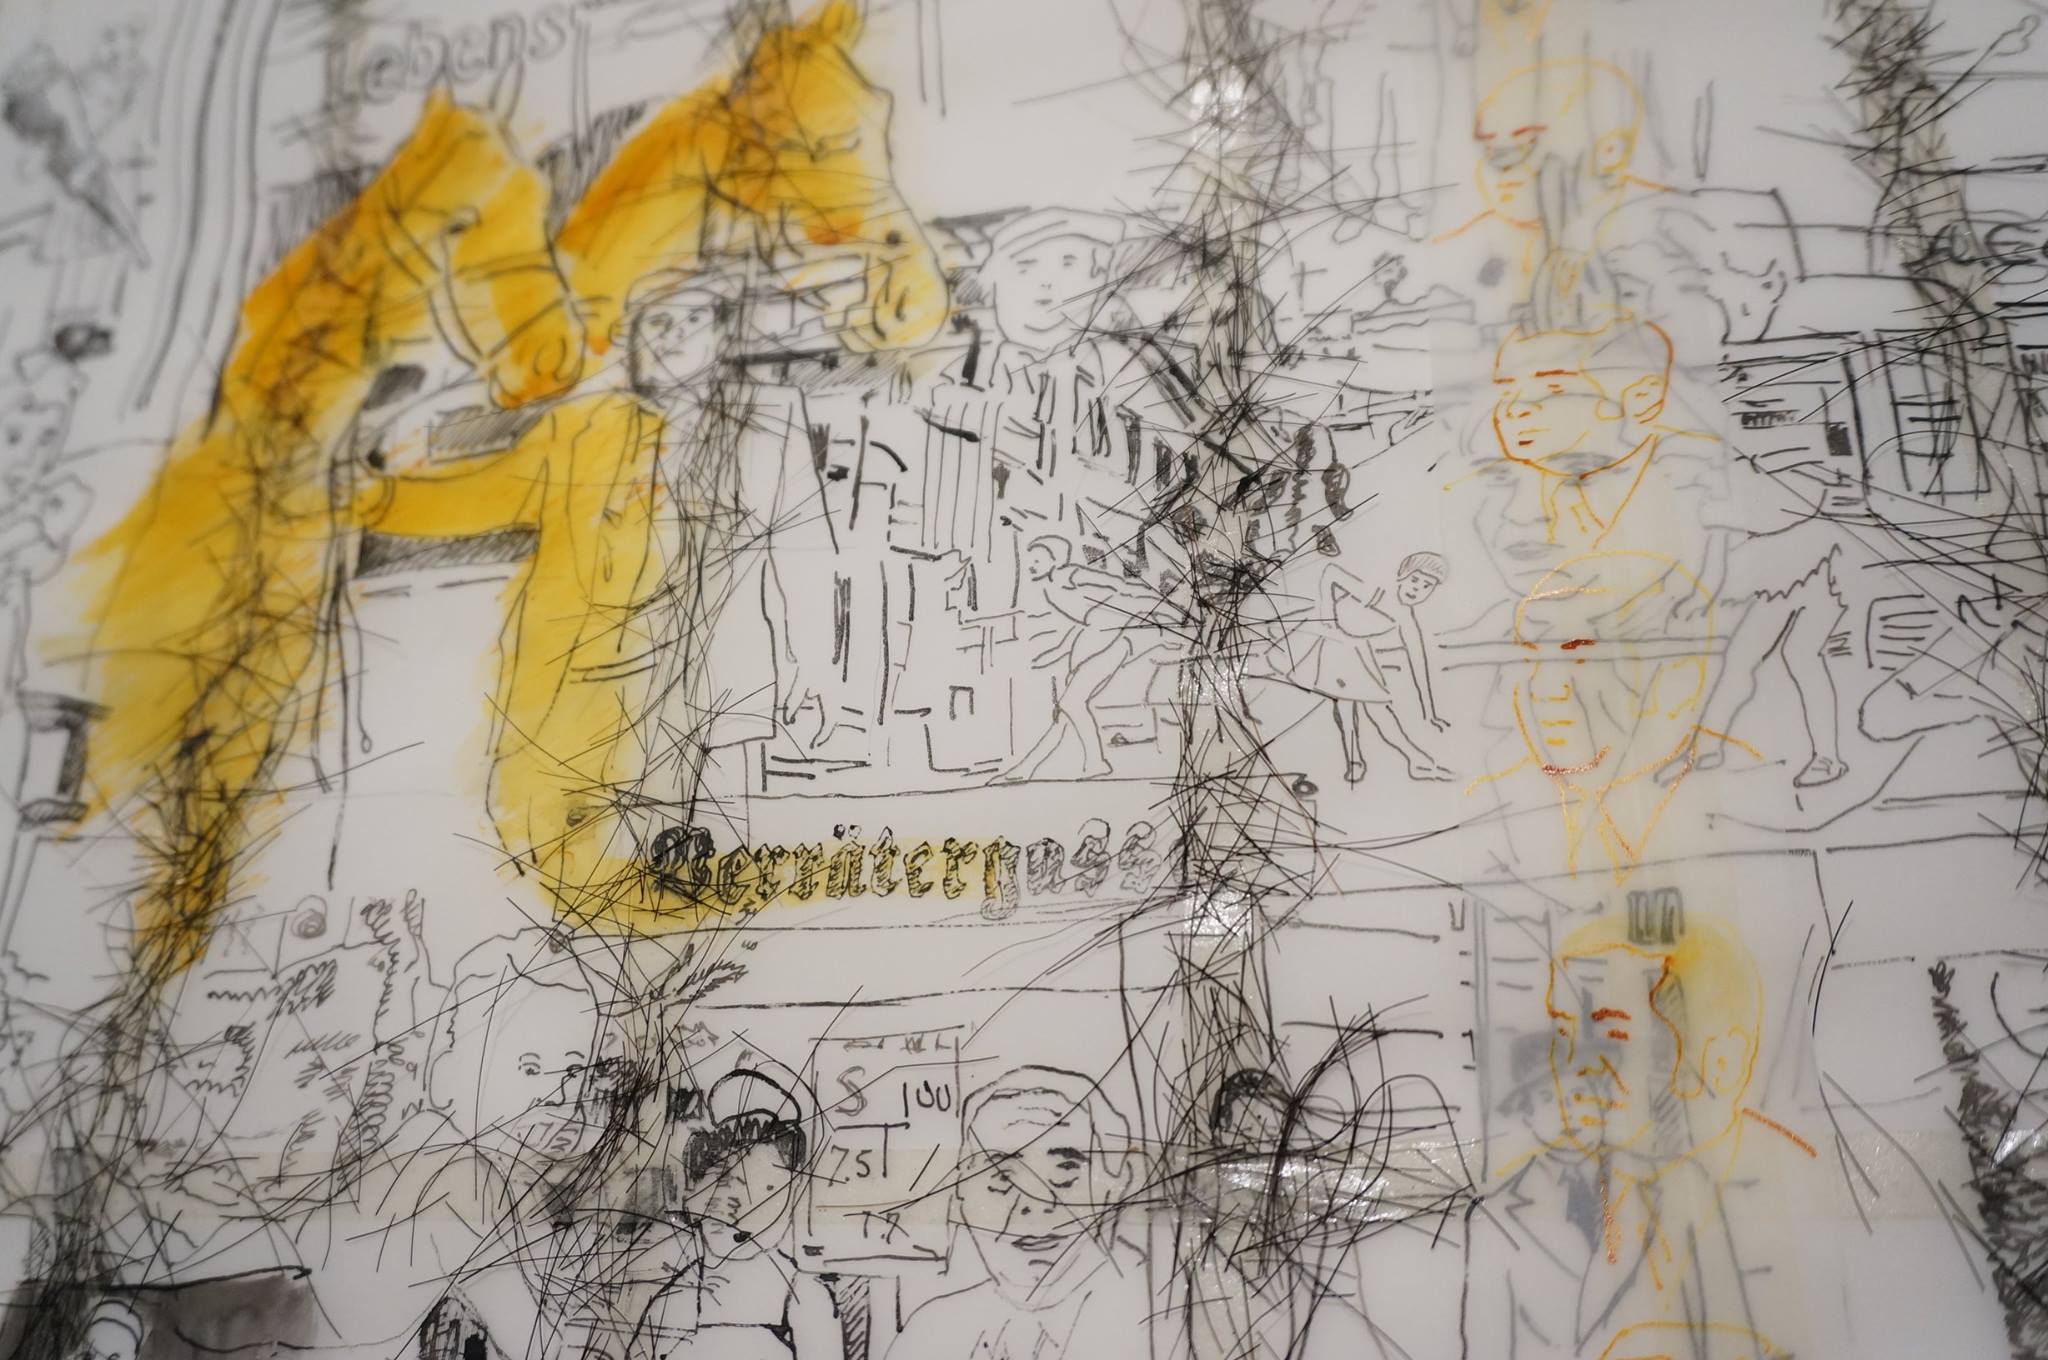 Retrospectacle, 2014-2015, serie of 5 drawings, marker on parchment paper (oil, horsehair), variable dimensions